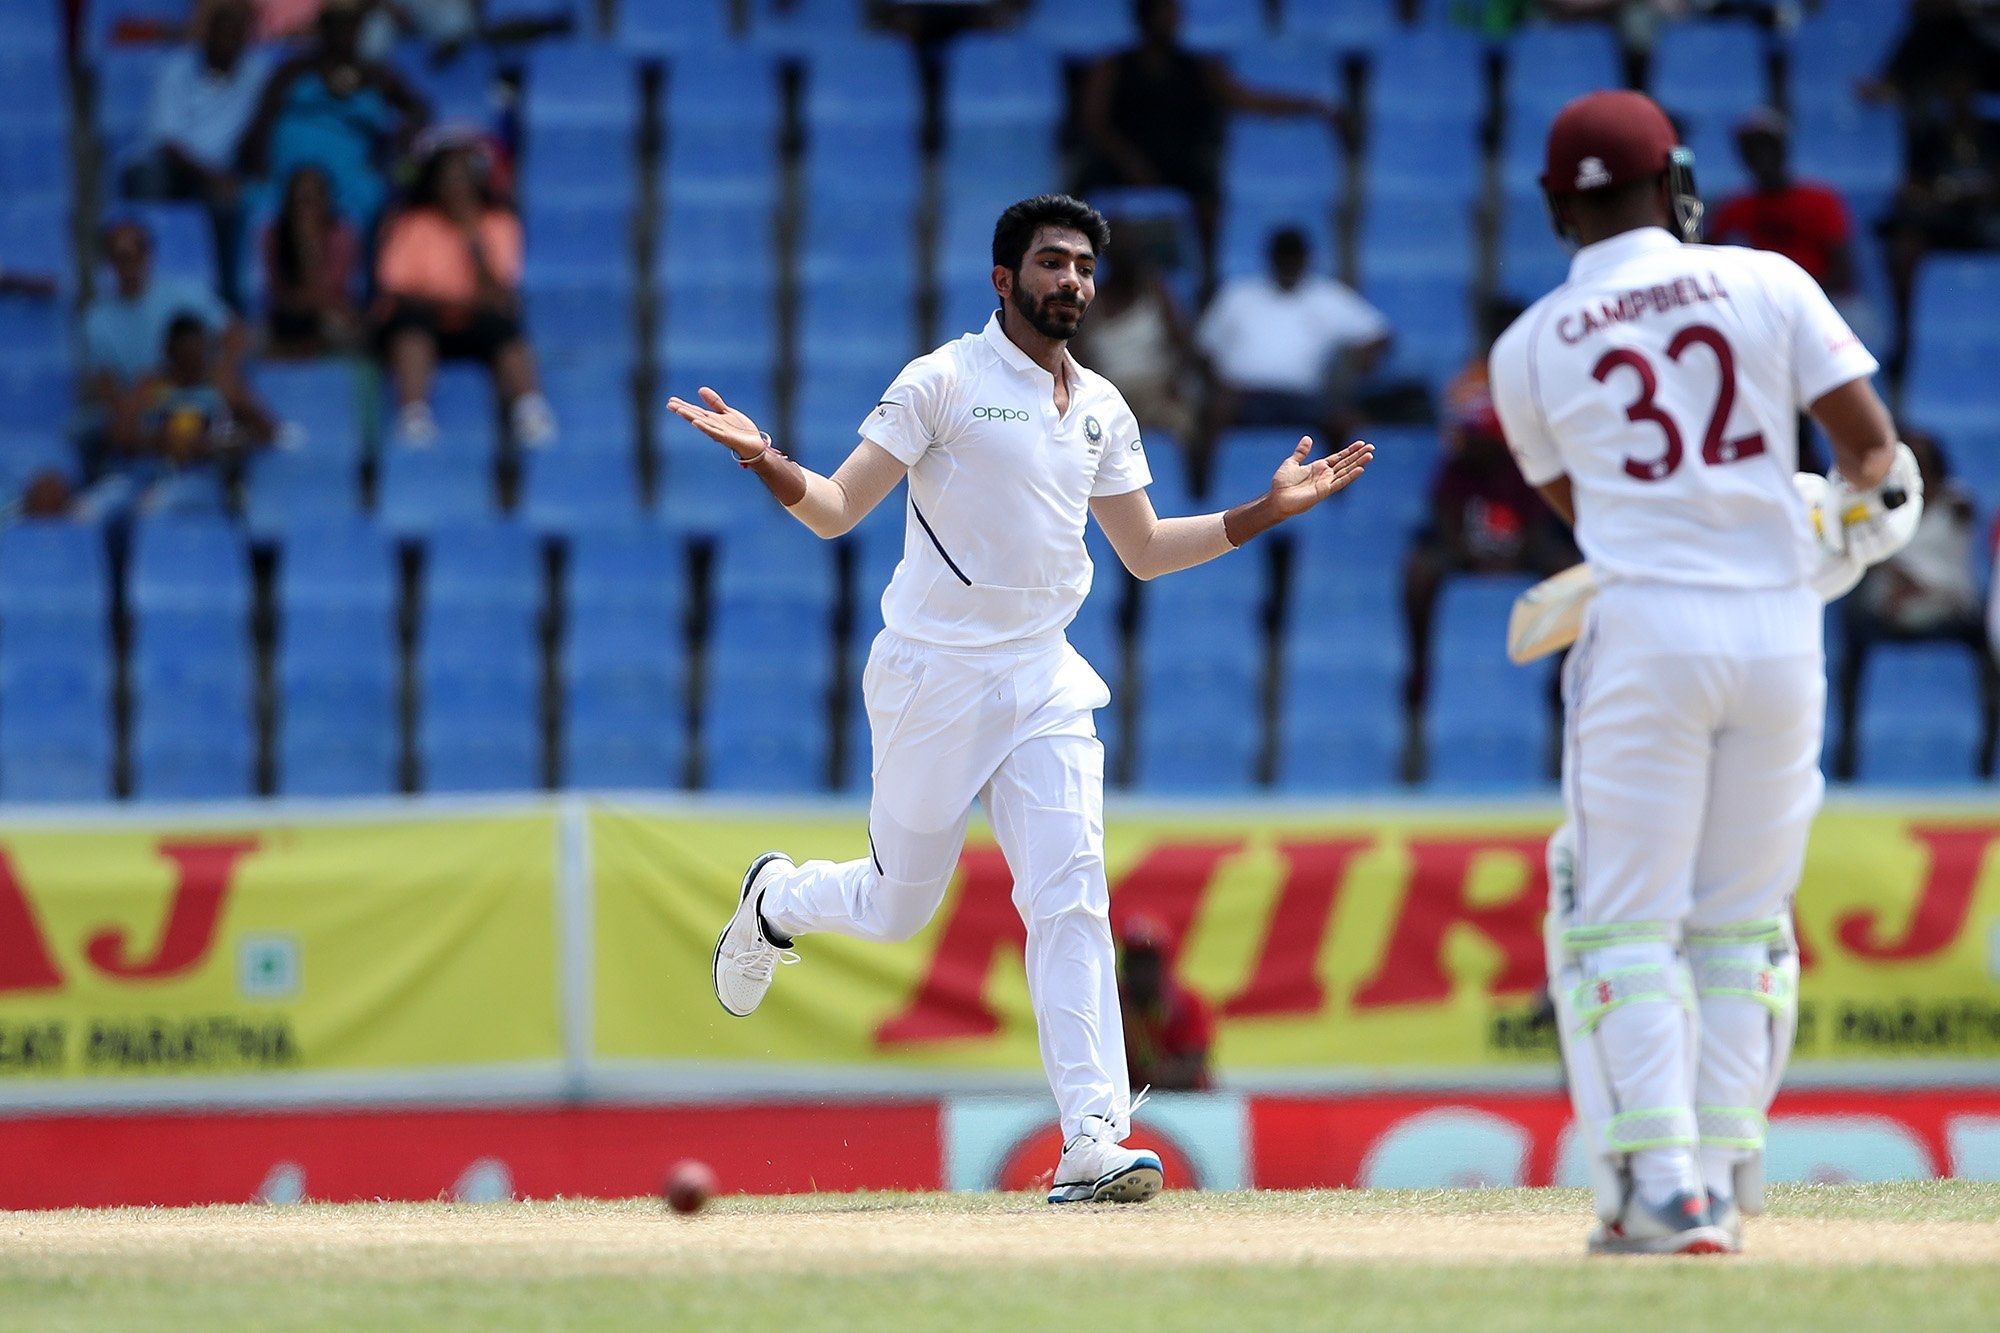 India vs West Indies Jasprit Bumrah Becomes First Asian to Take 5Fer